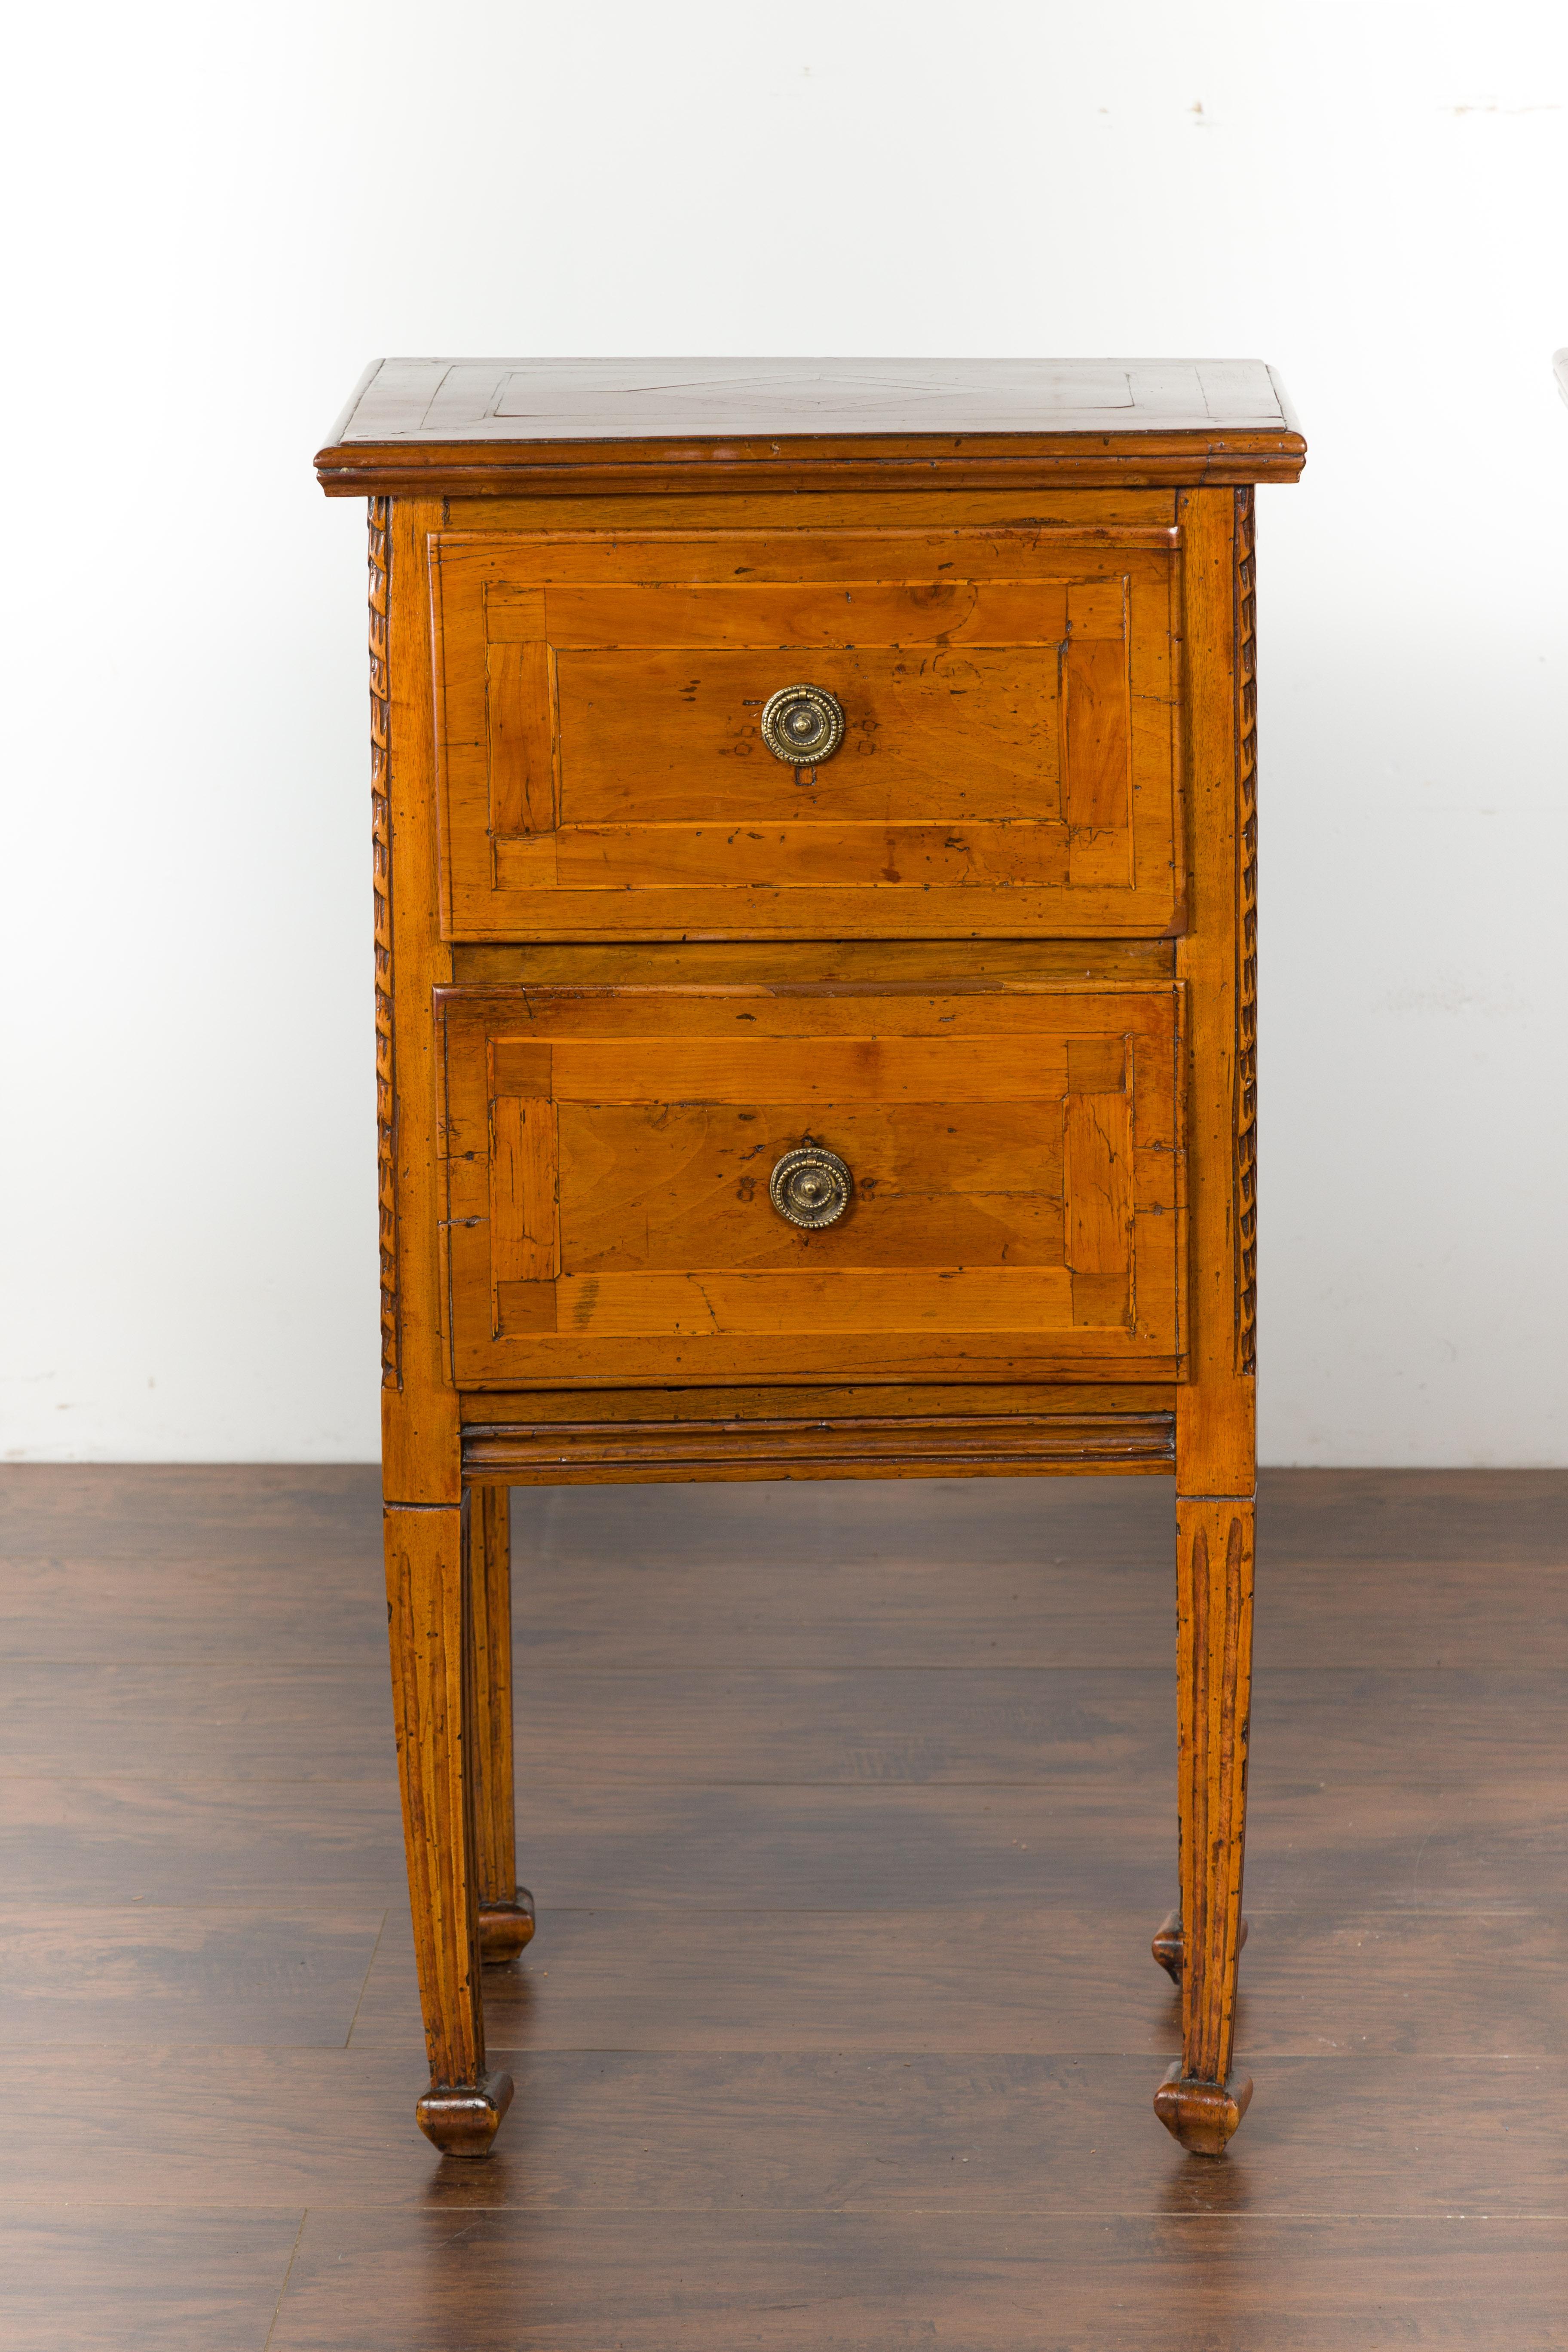 Pair of Italian 1820s Neoclassical Period Walnut Bedside Tables with Two Drawers For Sale 1